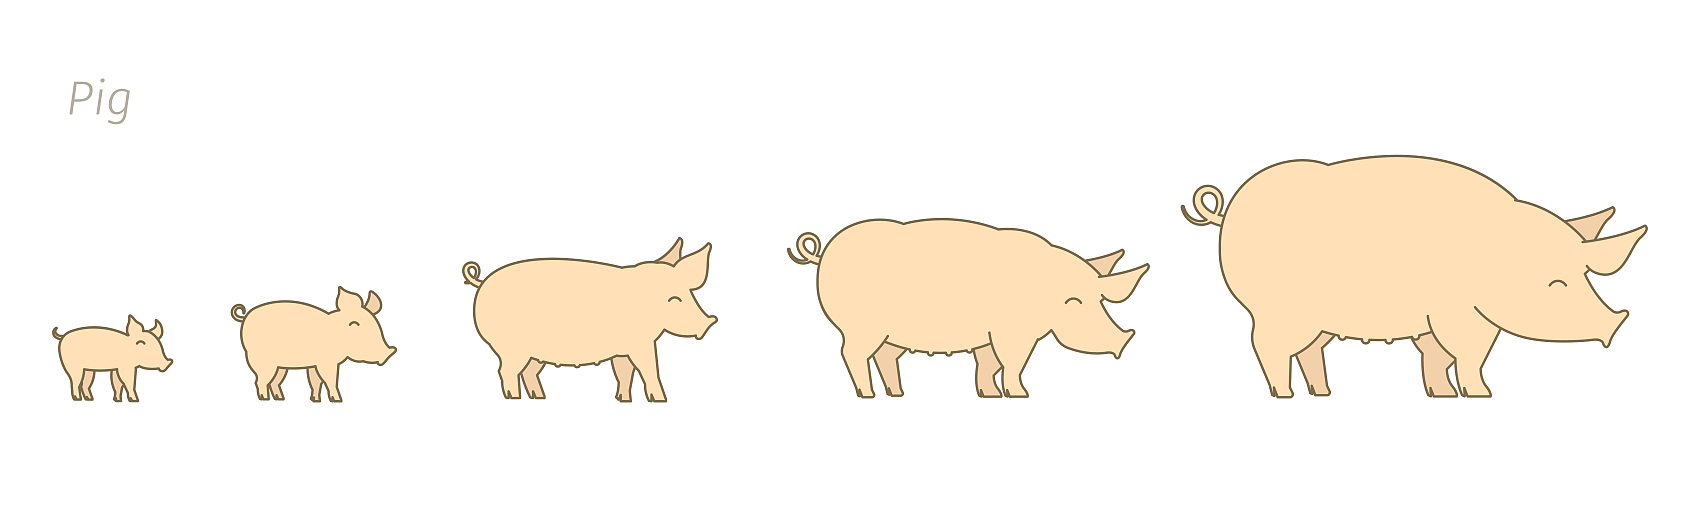 Pigs at different stages of growth